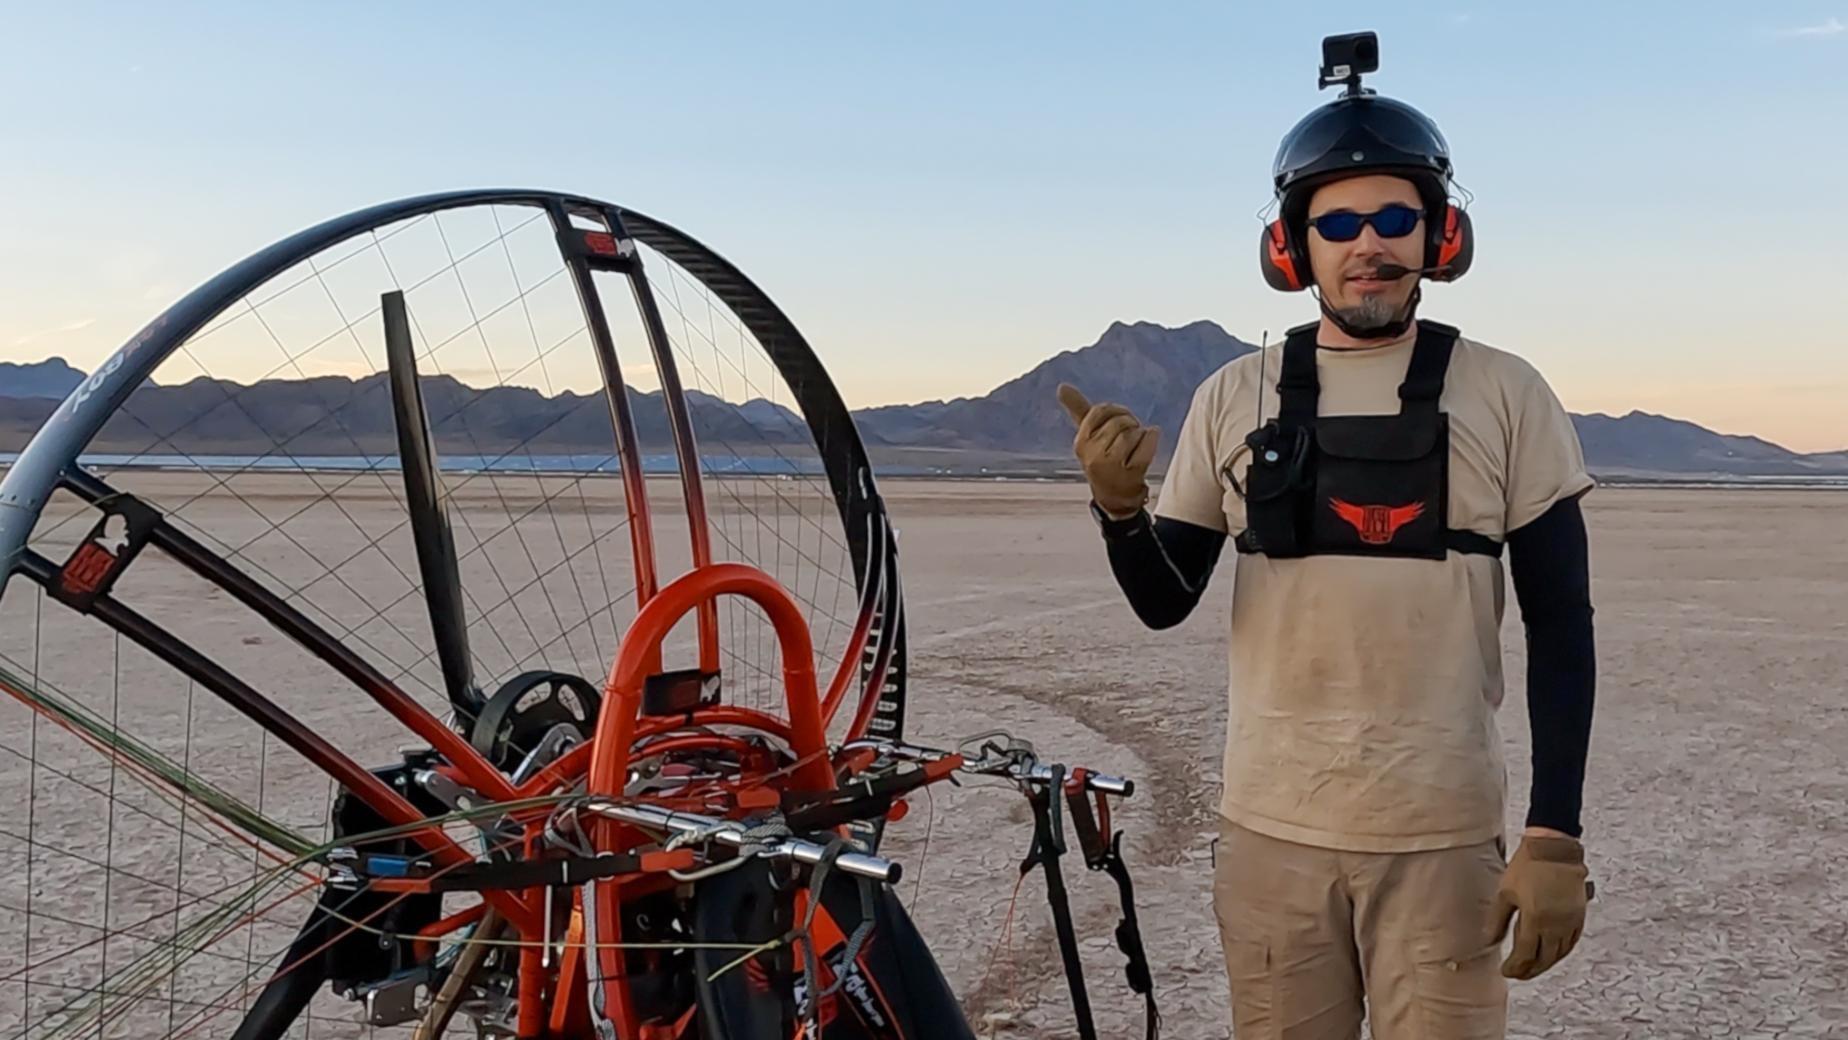 Adrian Goins in helmet and various bits of camera equipment standing next to an orange and black paramotor quad aircraft